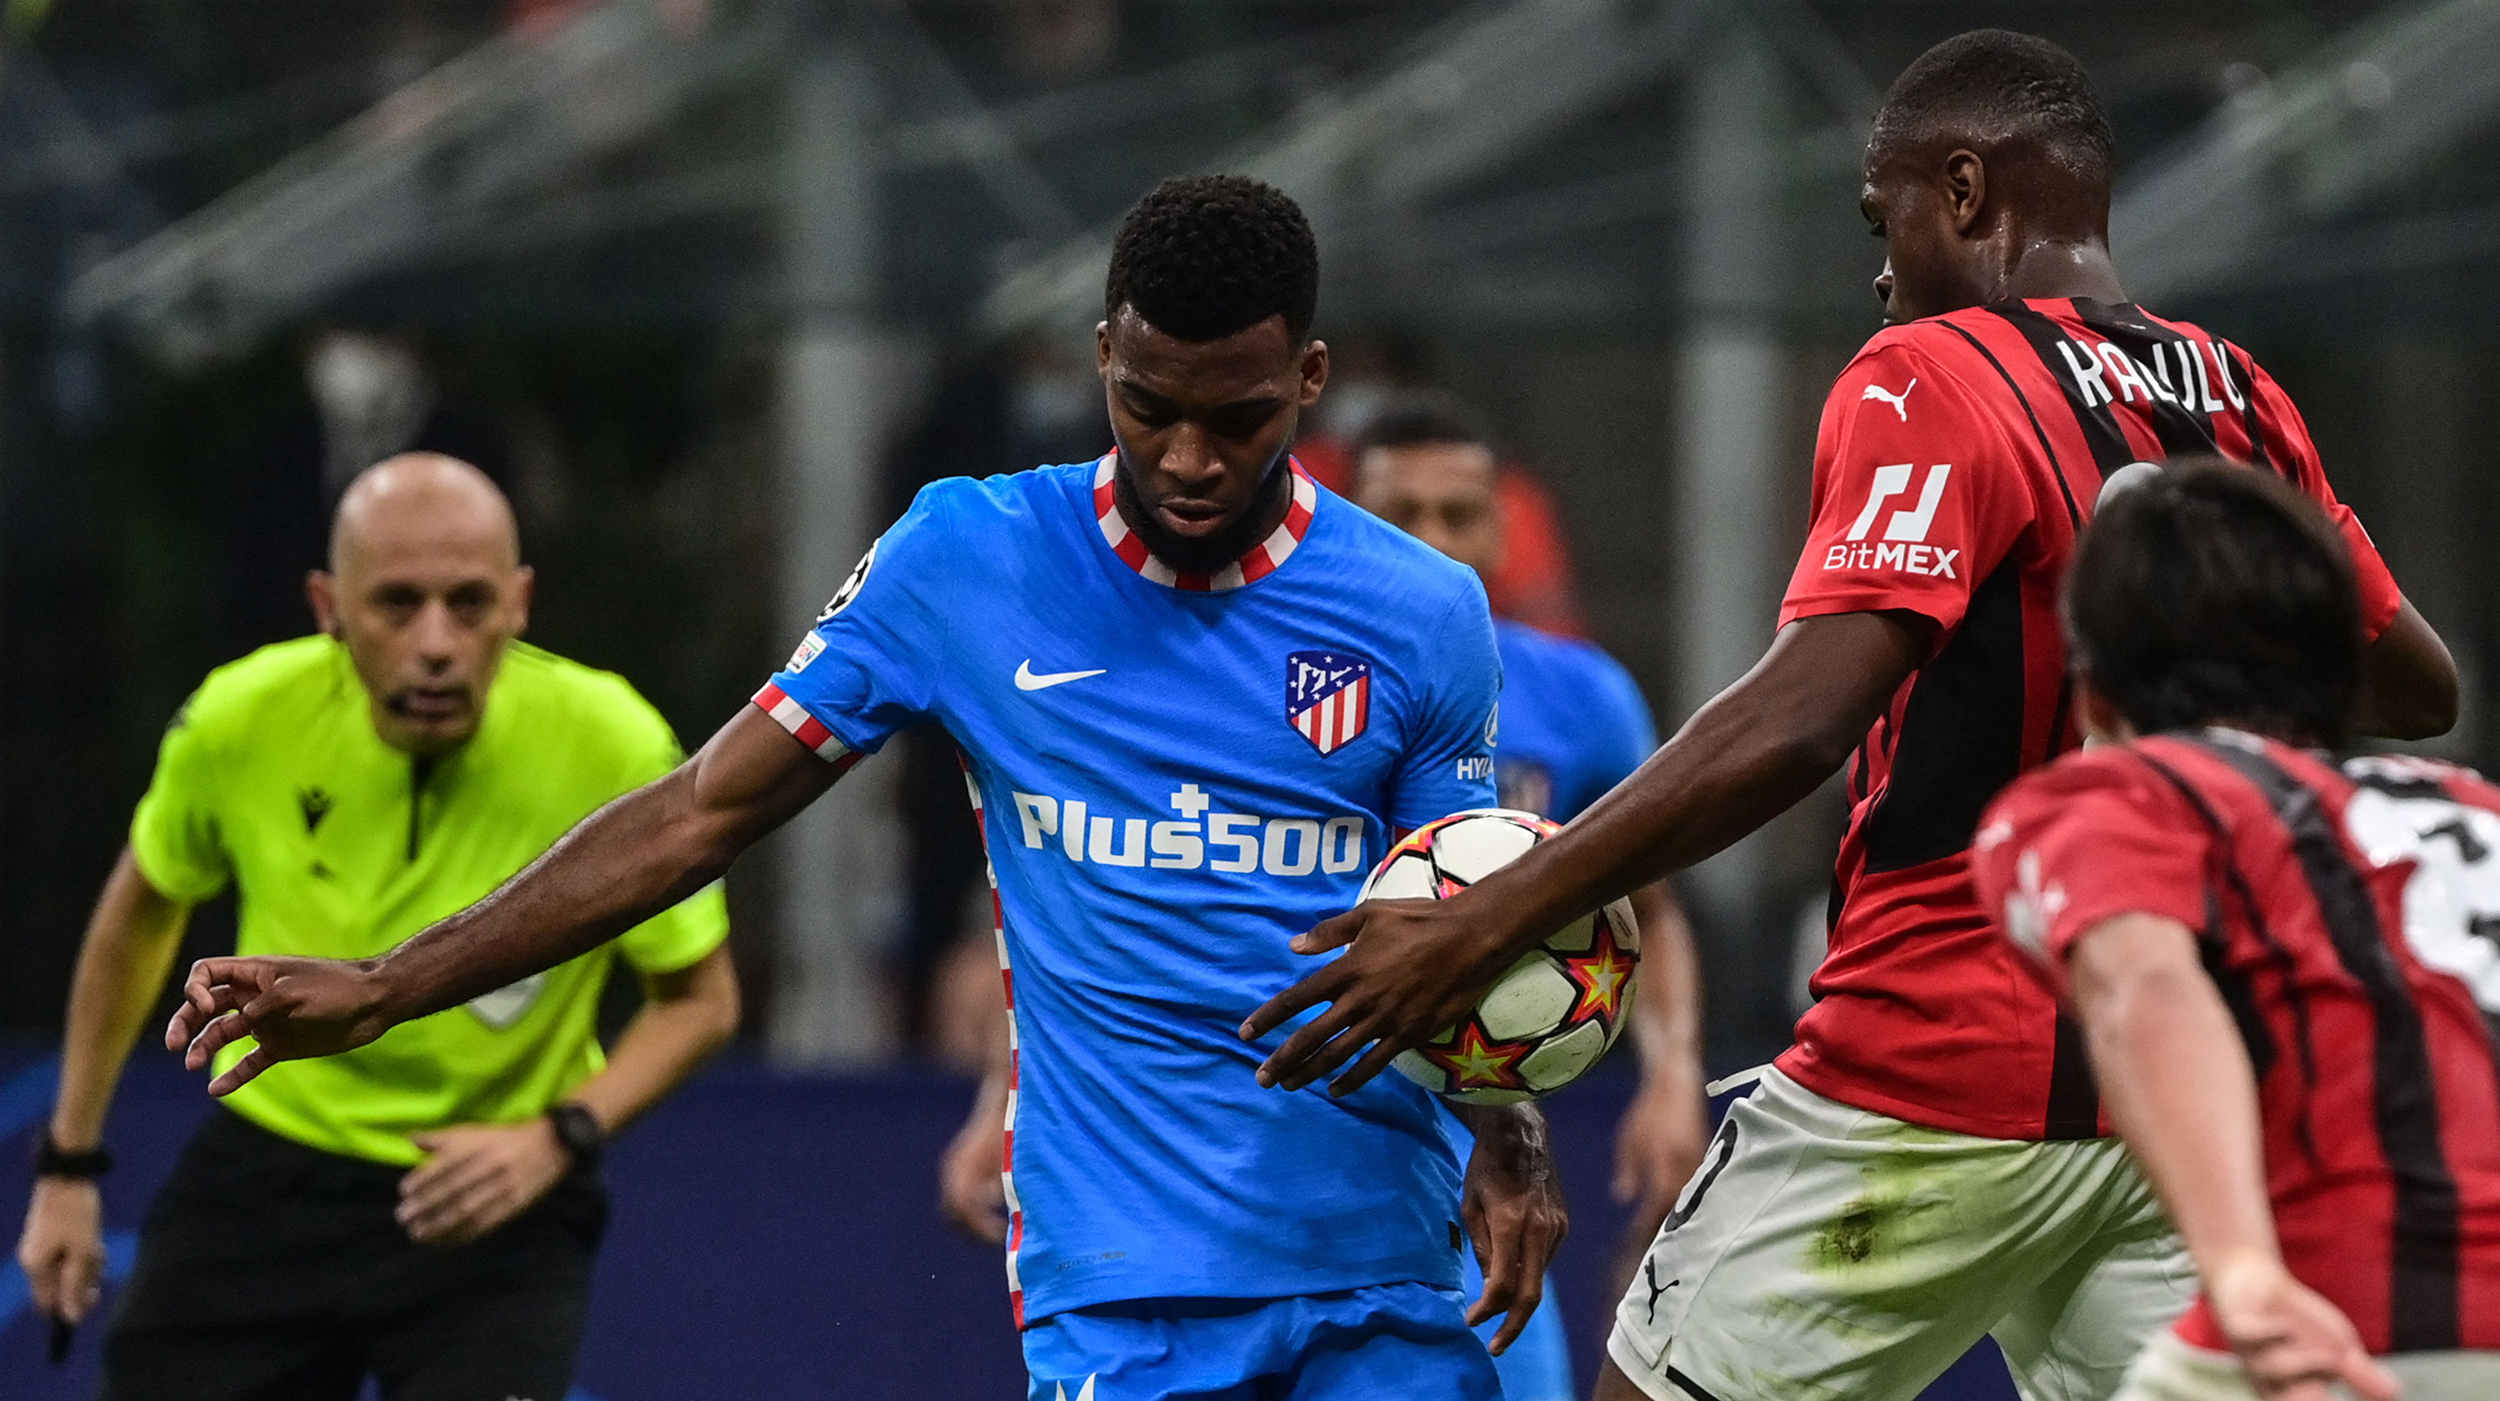 AC Milan's French defender Pierre Kalulu (2ndR) touches the ball with the hand in the penalty area during the UEFA Champions League Group B football match between AC Milan and Atletico Madrid on September 28, 2021 at the San Siro stadium in Milan.